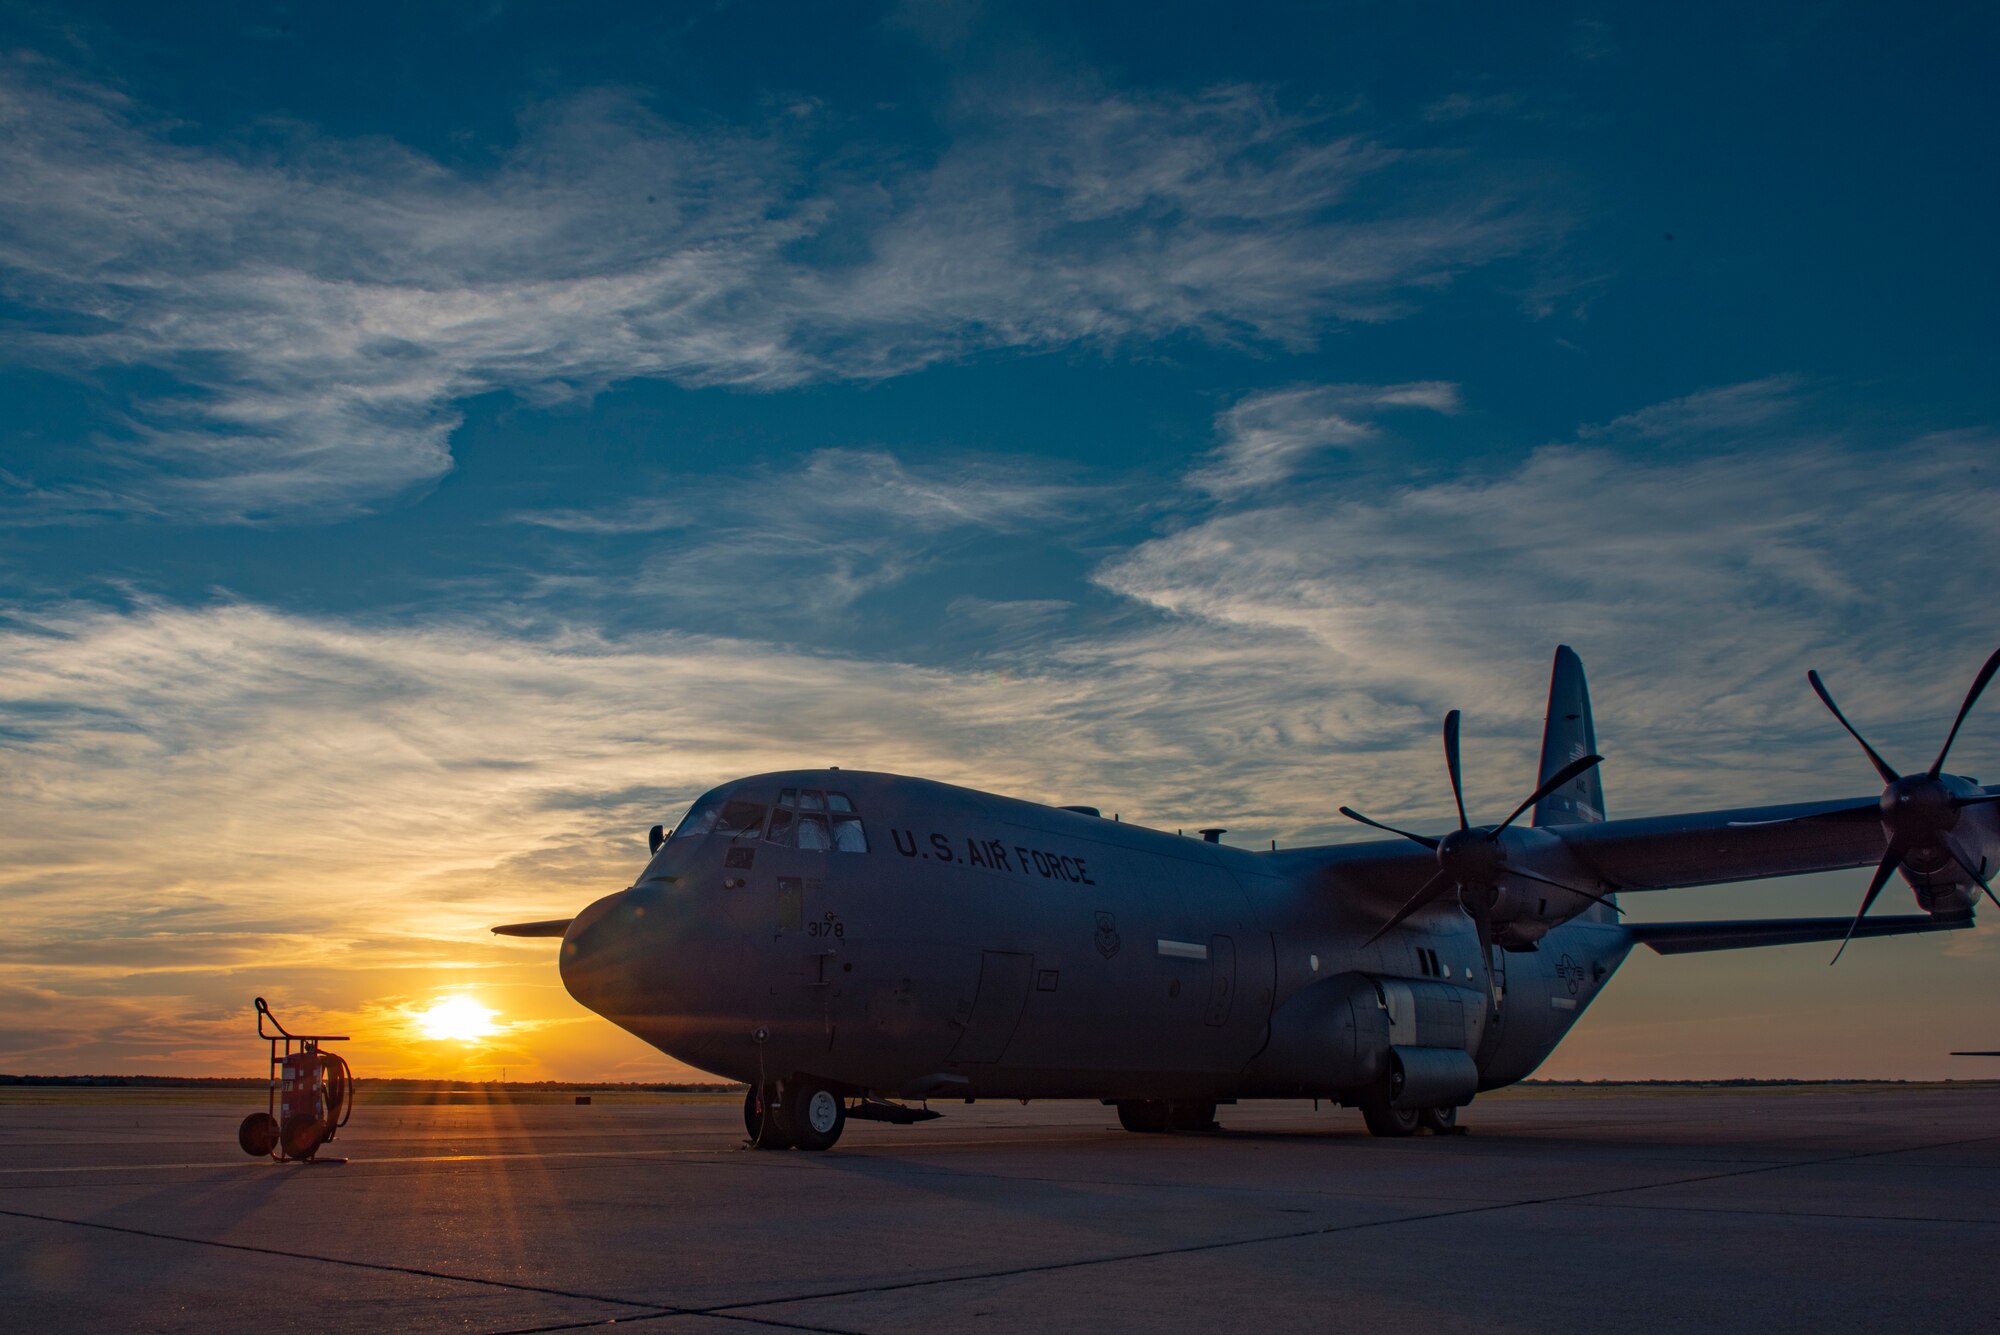 A C-130J Super Hercules sits on the flightline at Dyess Air Force Base, Texas, June 3, 2020. The new 4/12 deployment cycle allows the 39th and 40th Airlift Squadrons more time to train in alignment with the 2018 National Defense Strategy. (U.S. Air Force photo by Airman 1st Class Colin Hollowell)